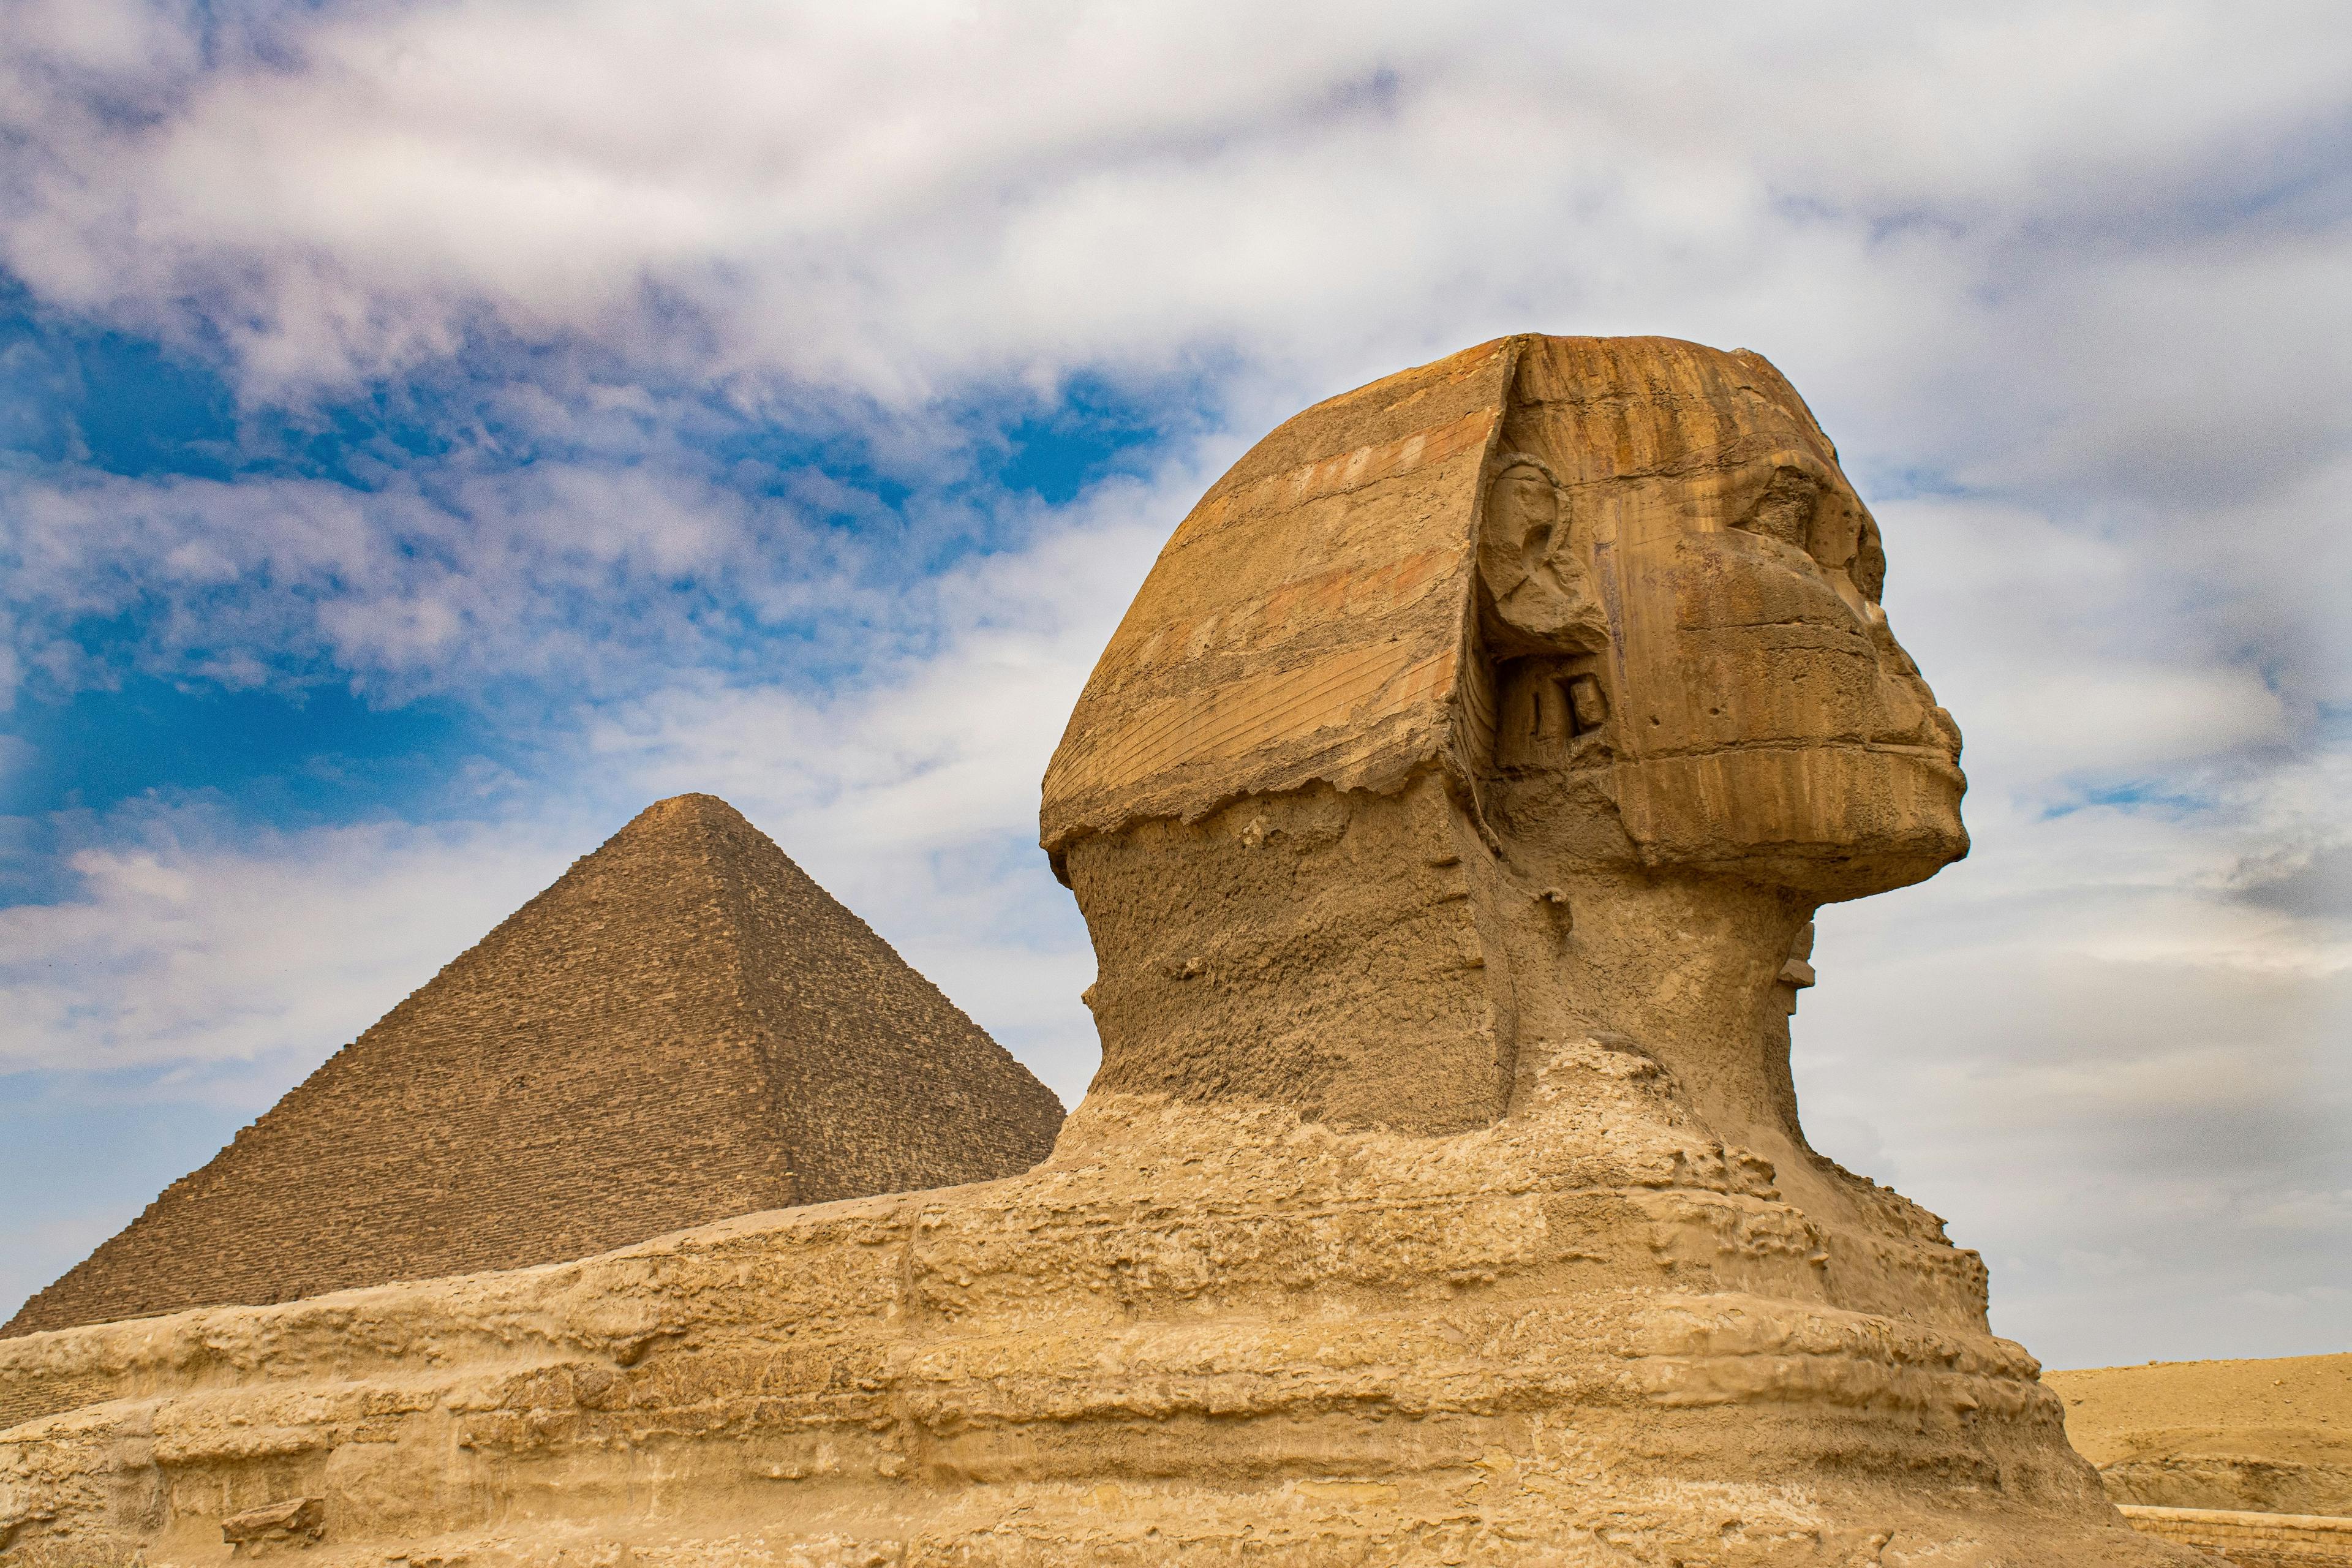 The Great Sphinx in Egypt.